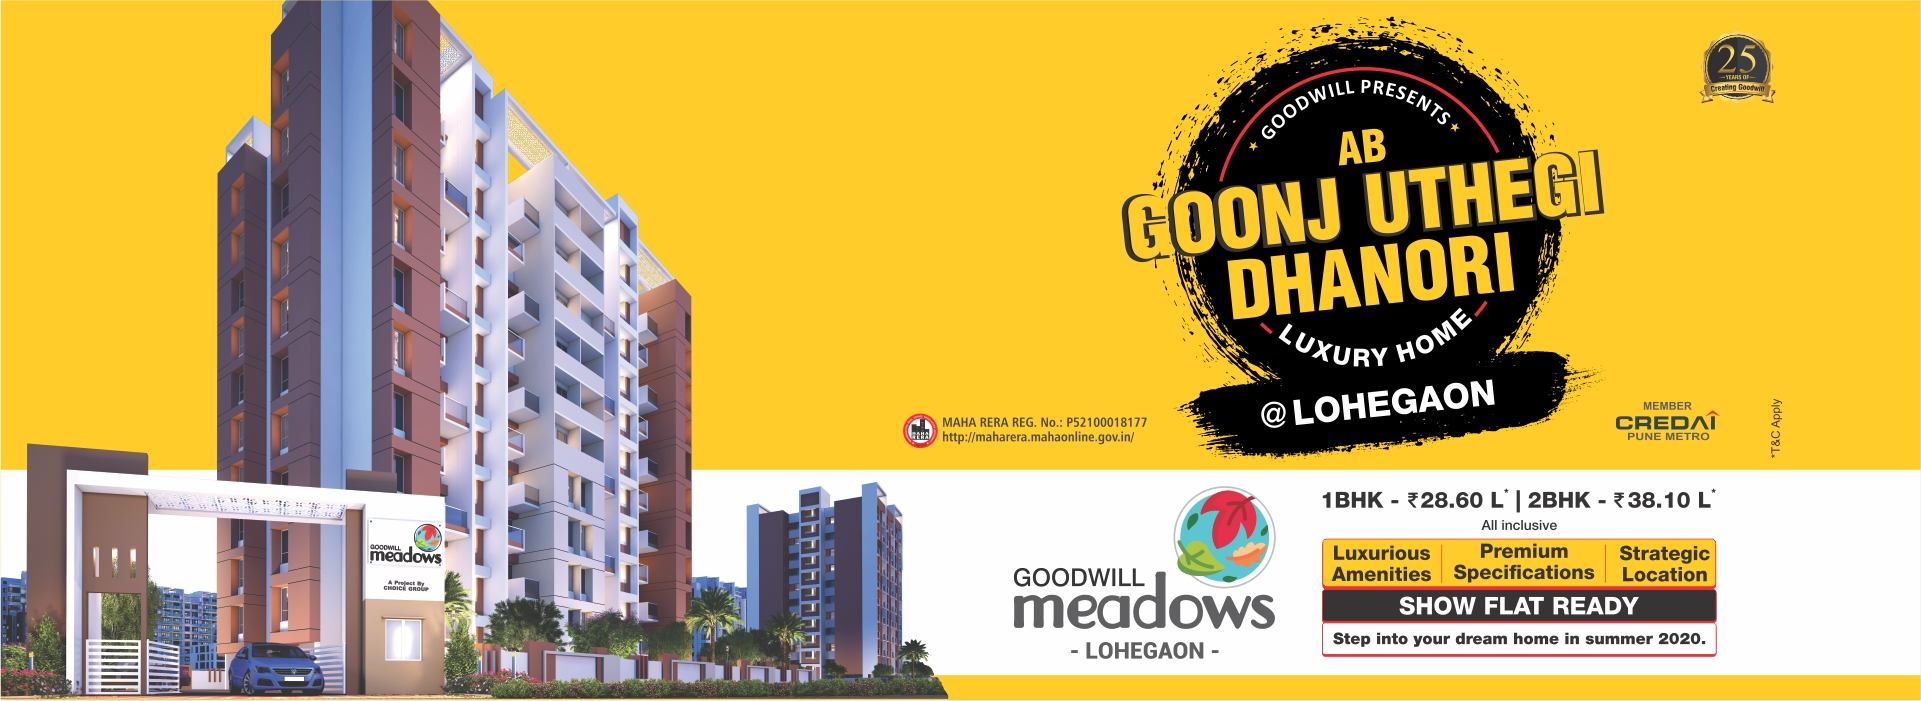 Choice Goodwill Meadows offers 1 BHK at Rs 28.60 Lac in Pune Update